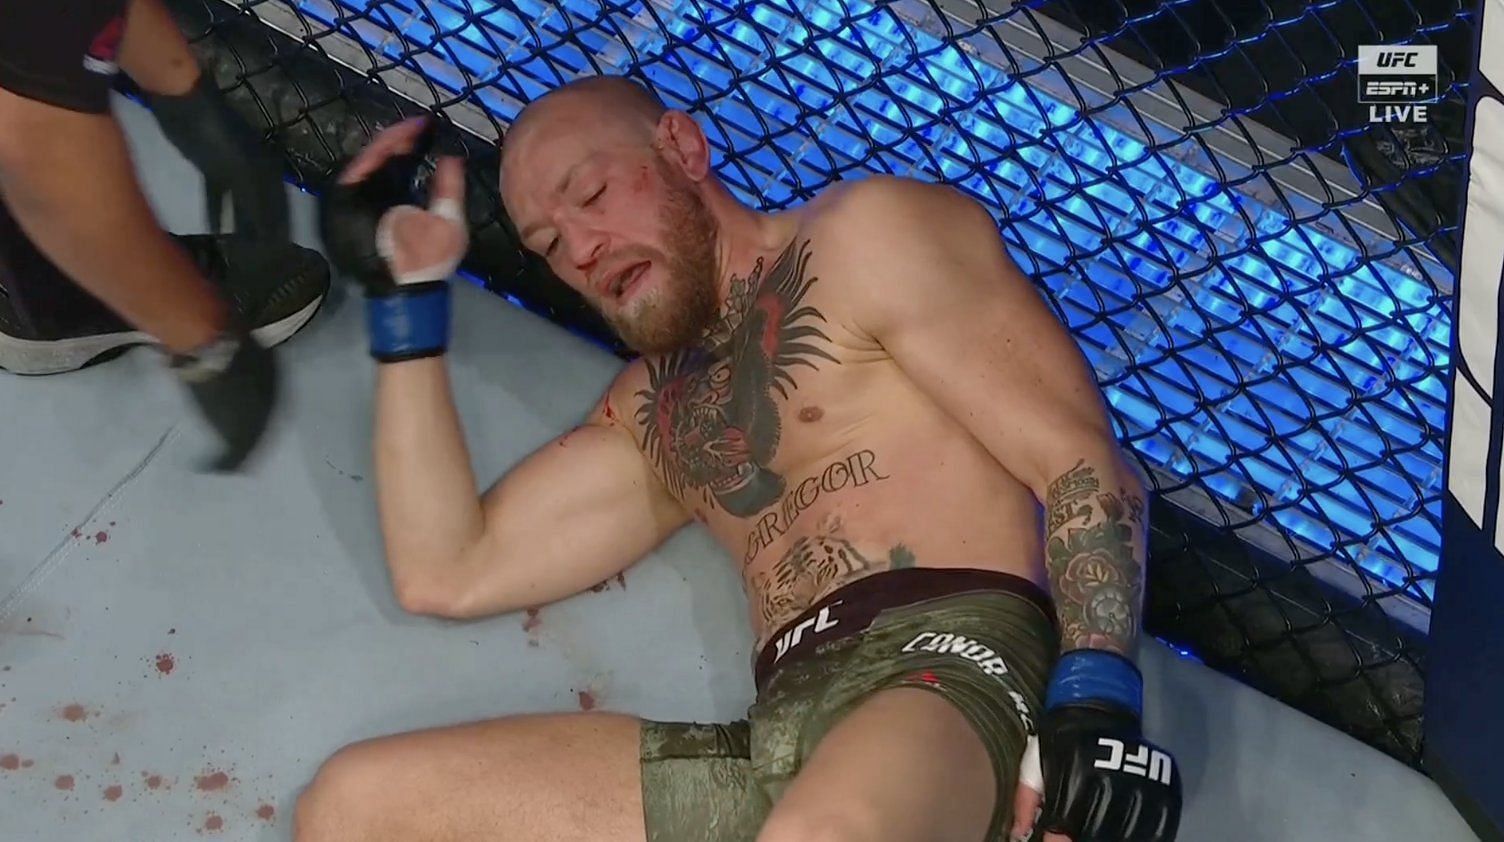 McGregor suffered his first knockout loss at UFC 257